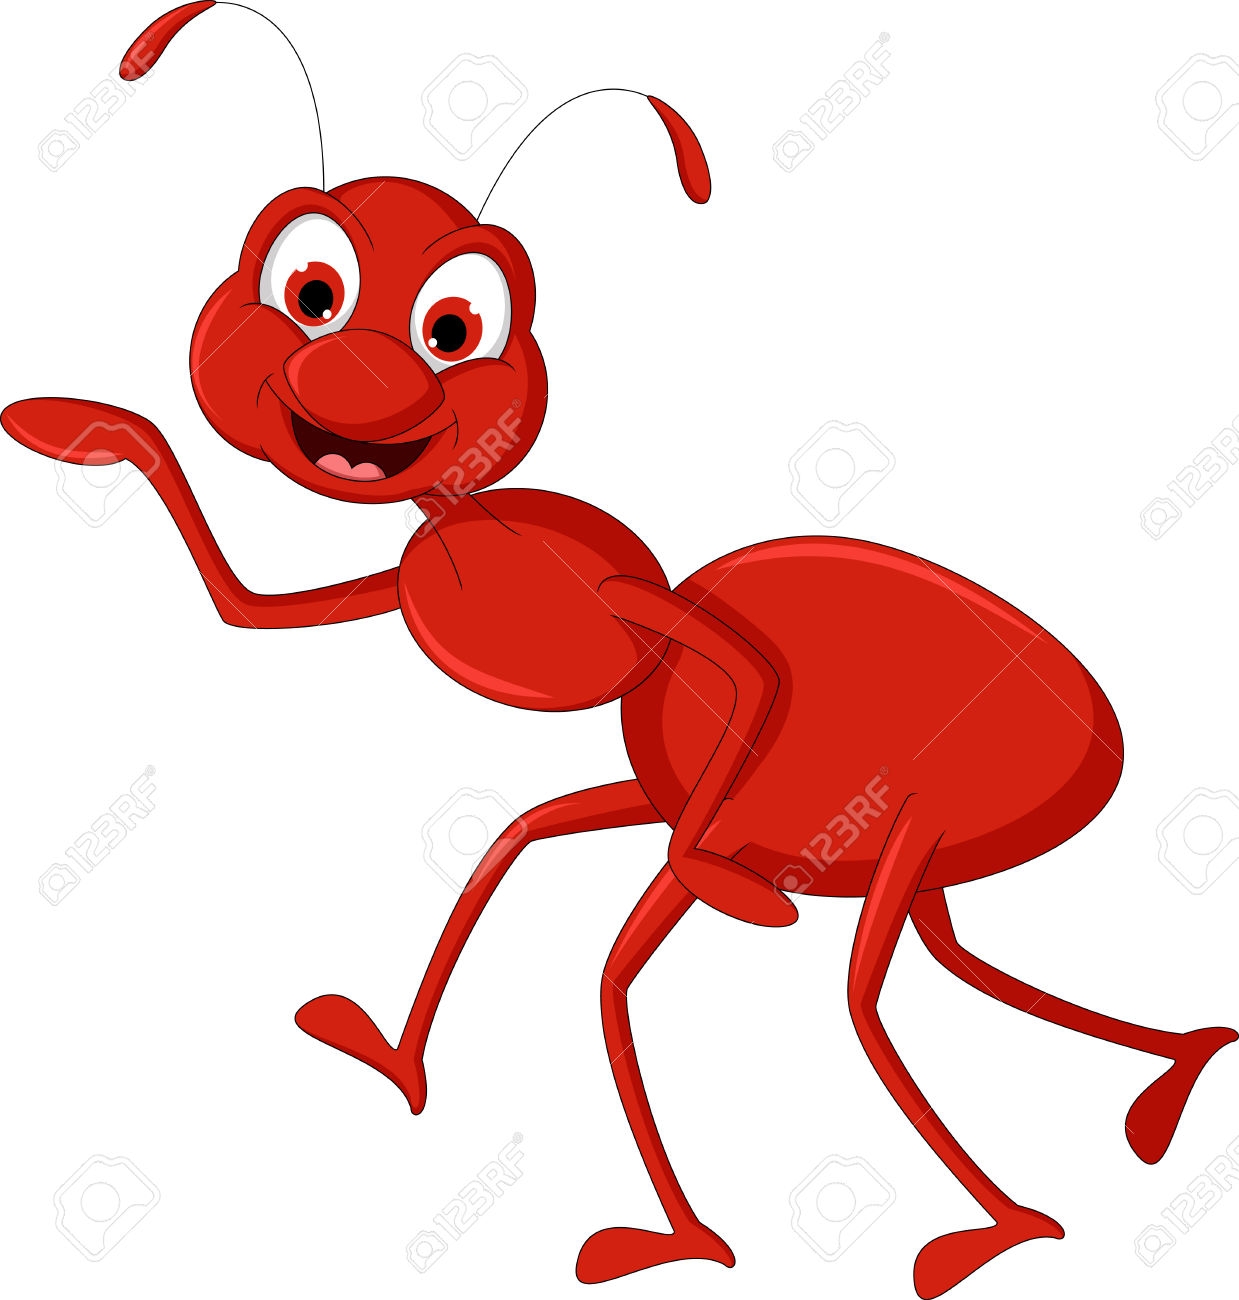 Ants clipart animation.